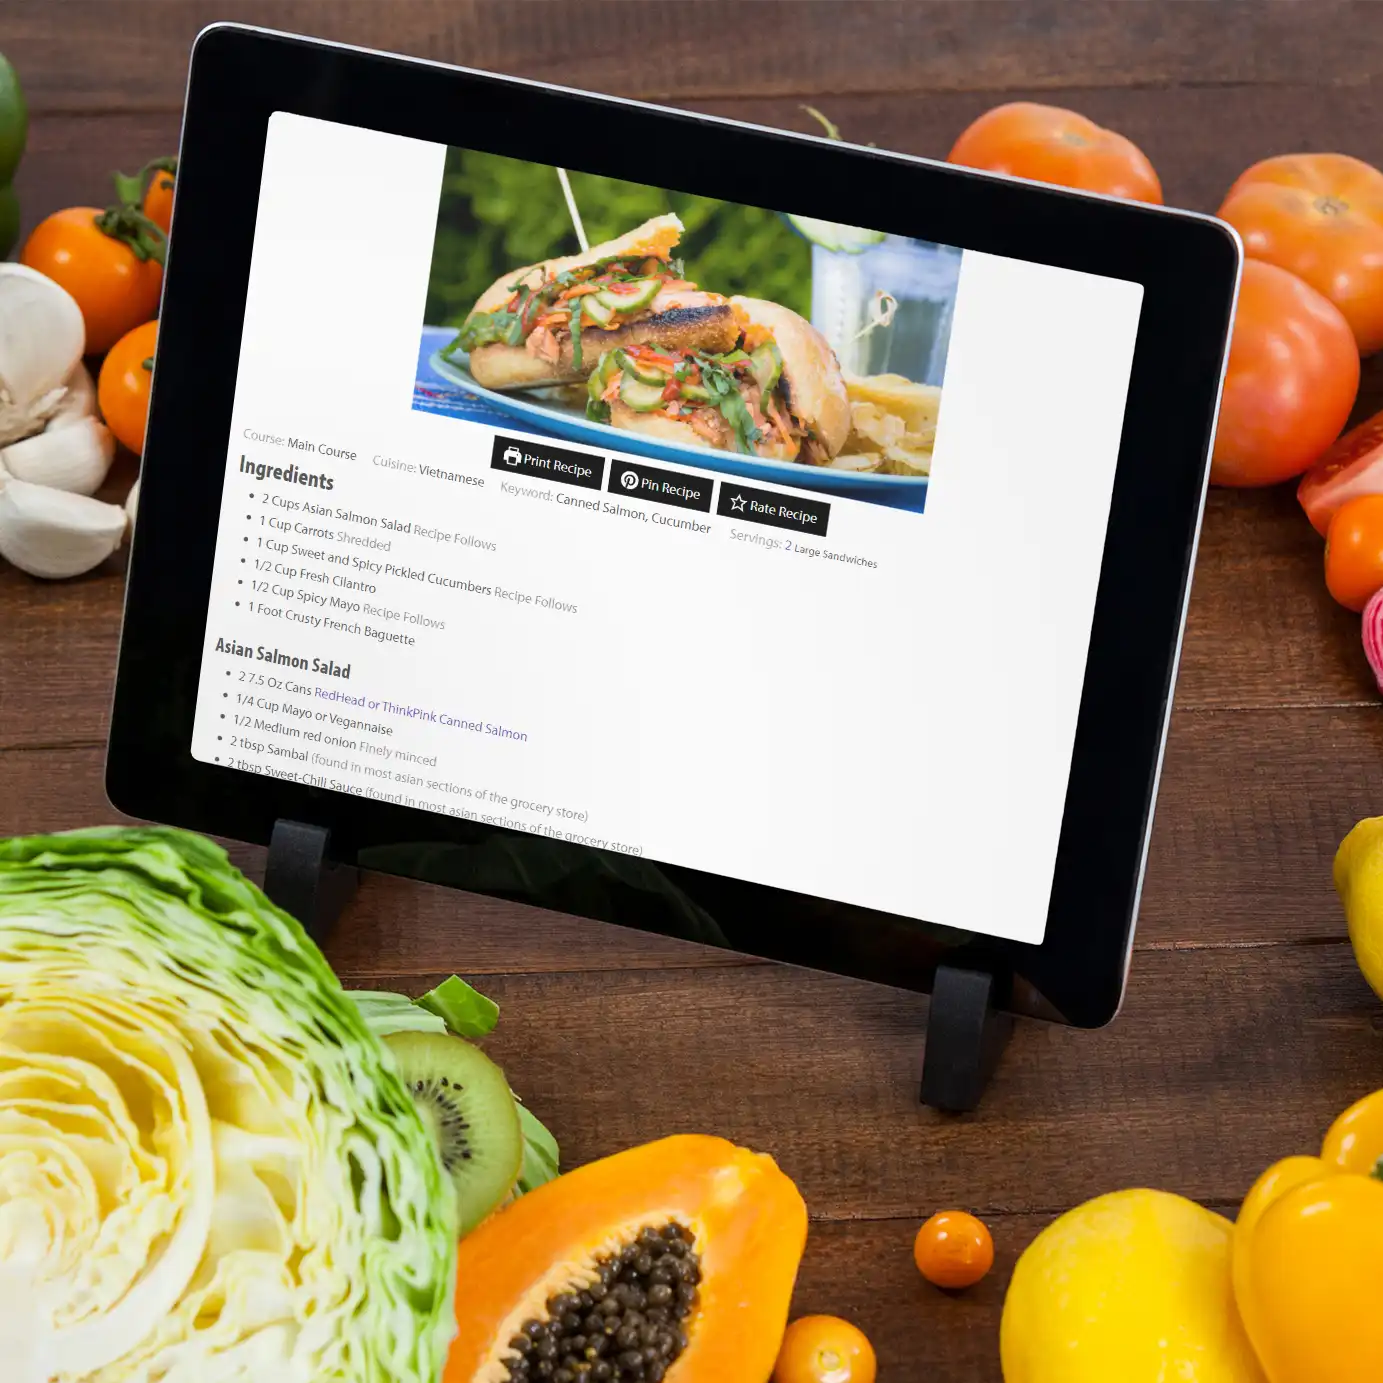 Recipe page shown on a tablet